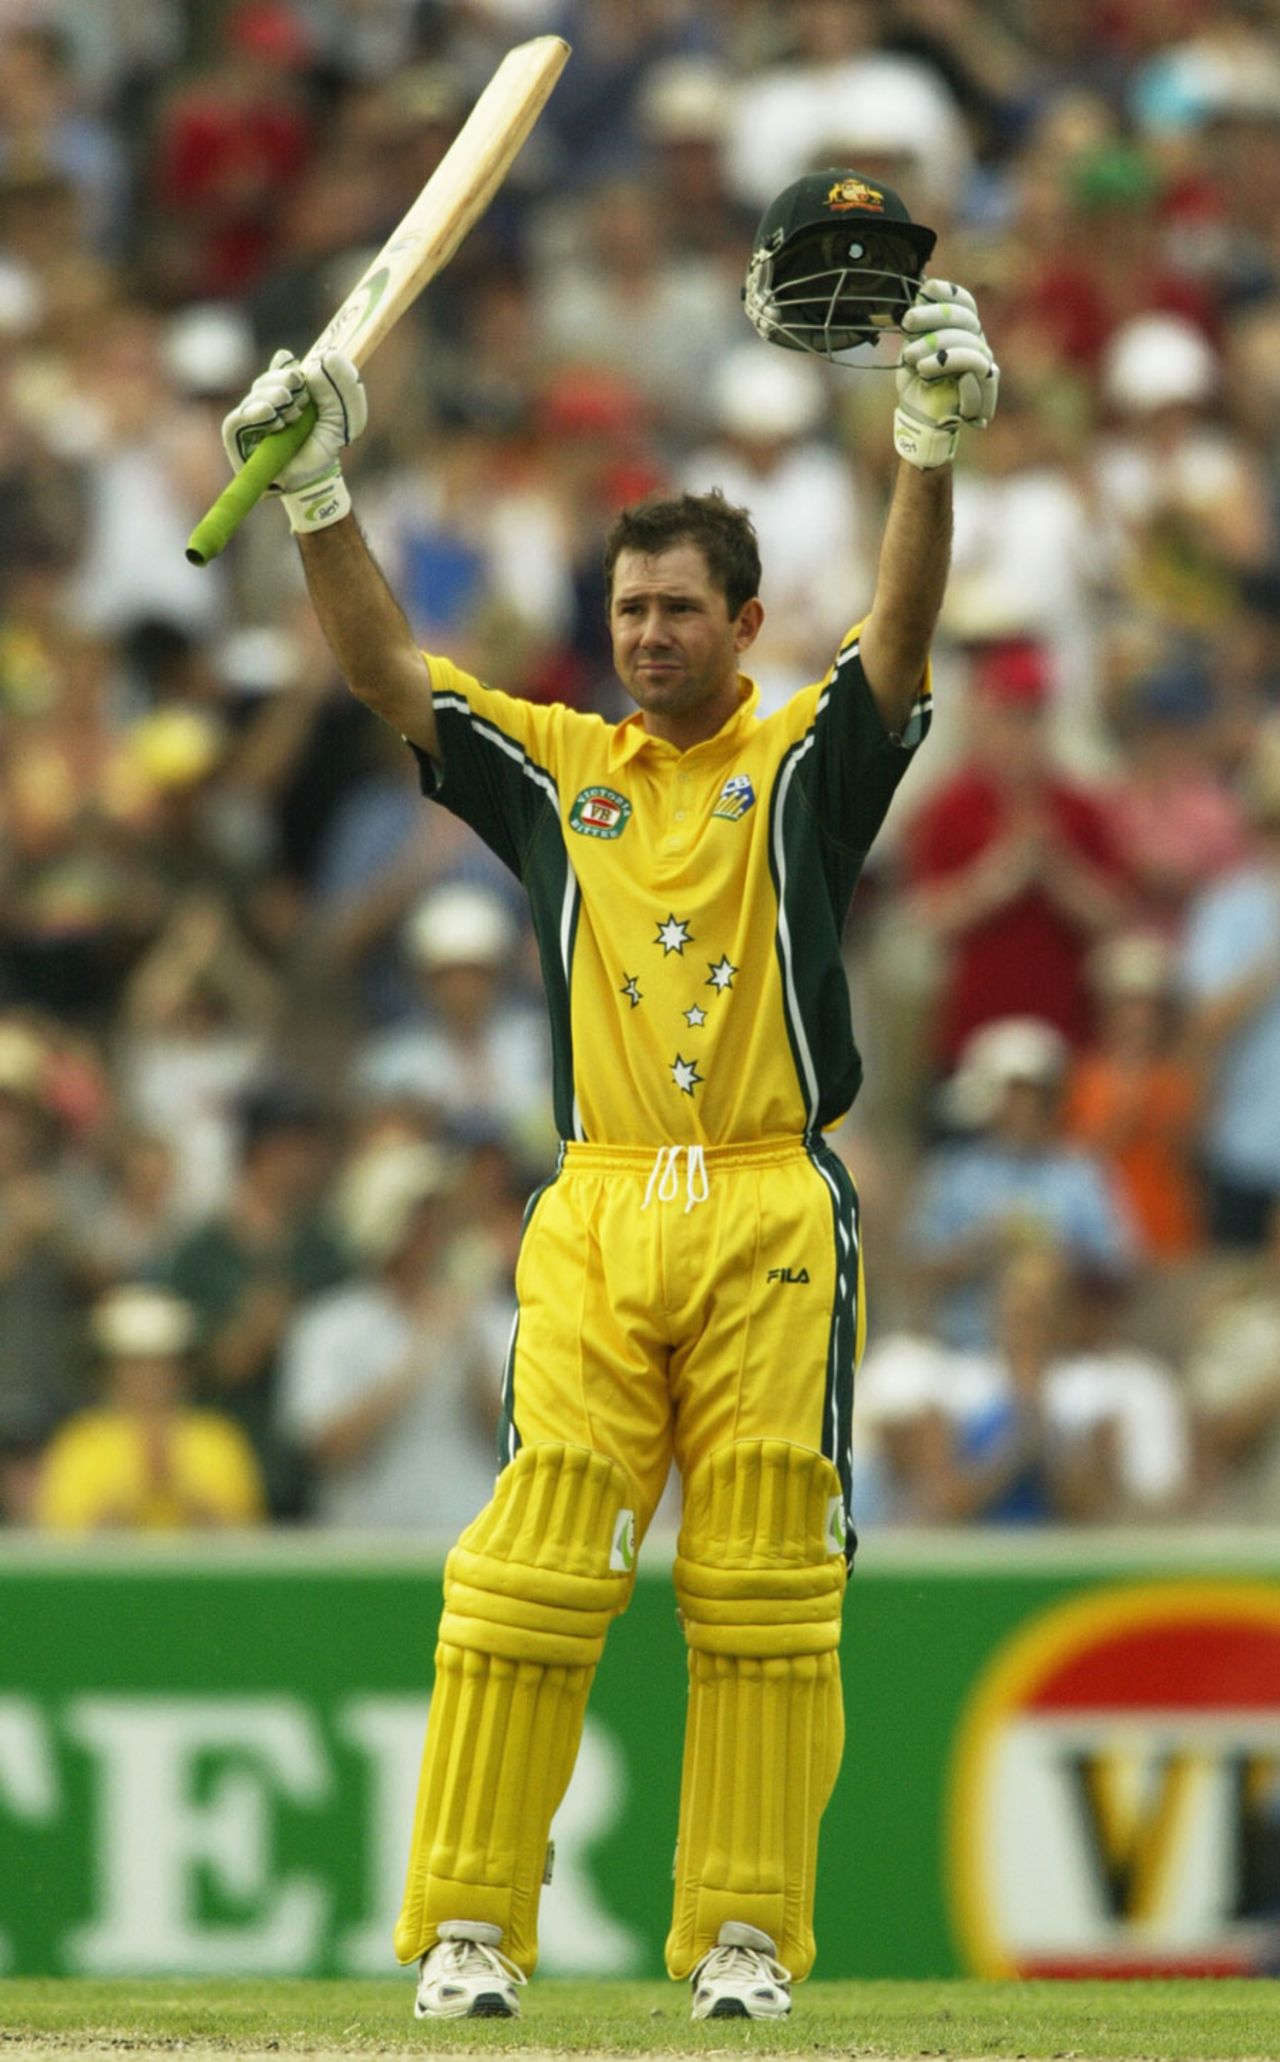 MELBOURNE - DECEMBER 15: Ricky Ponting raises his arms after reaching his century in the One Day International match between Australia and England at the Melbourne Cricket Ground in Melbourne, Australia on December 15, 2002.